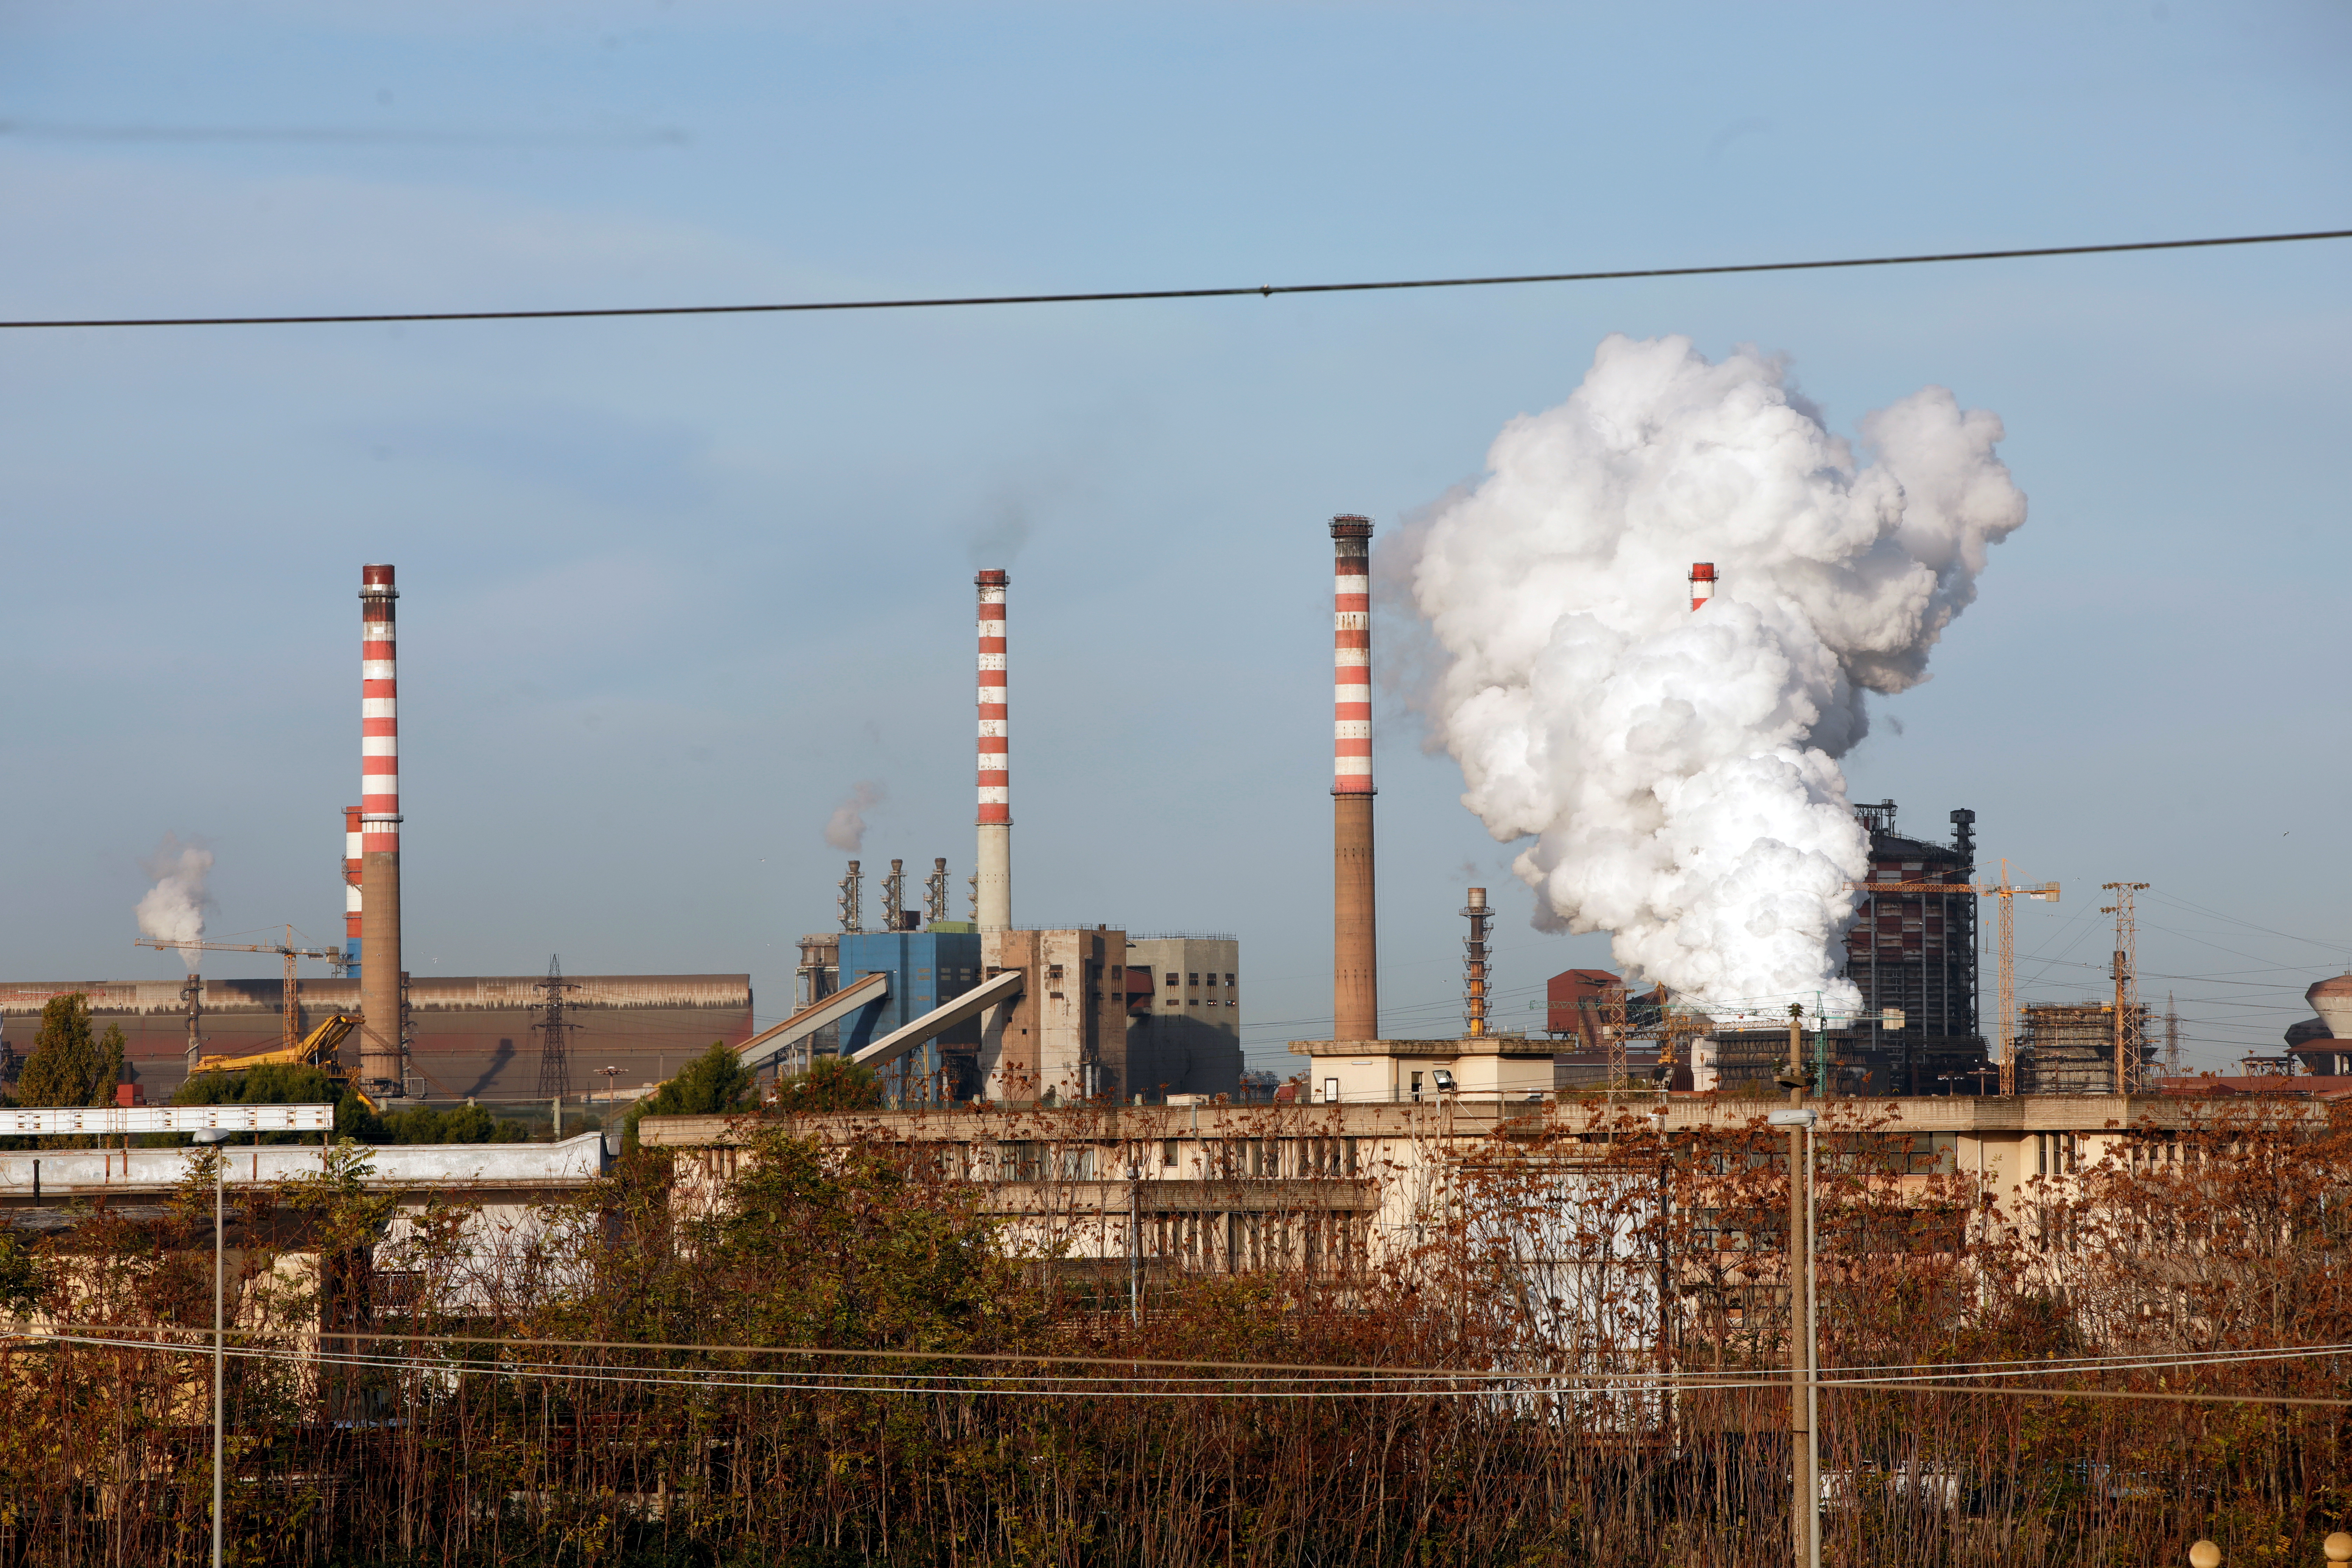 Steam comes out of the chimneys of the Ilva steel plant in Taranto